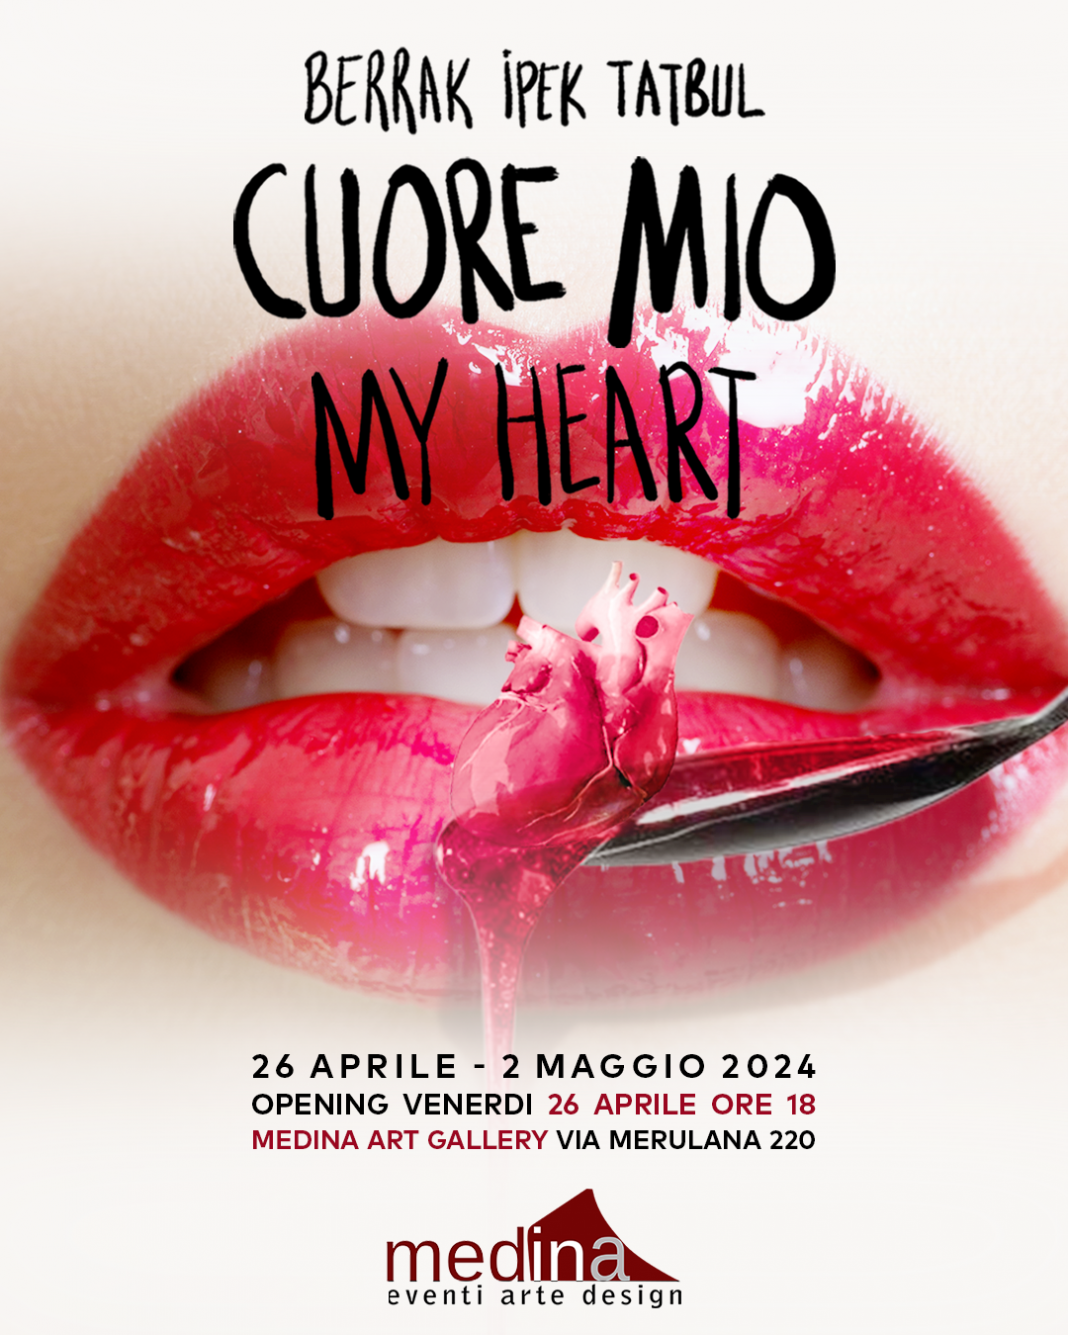 MY HEART-CUORE MIOhttps://www.exibart.com/repository/media/formidable/11/img/453/LOCANDINA-MY-HEART--1068x1335.png